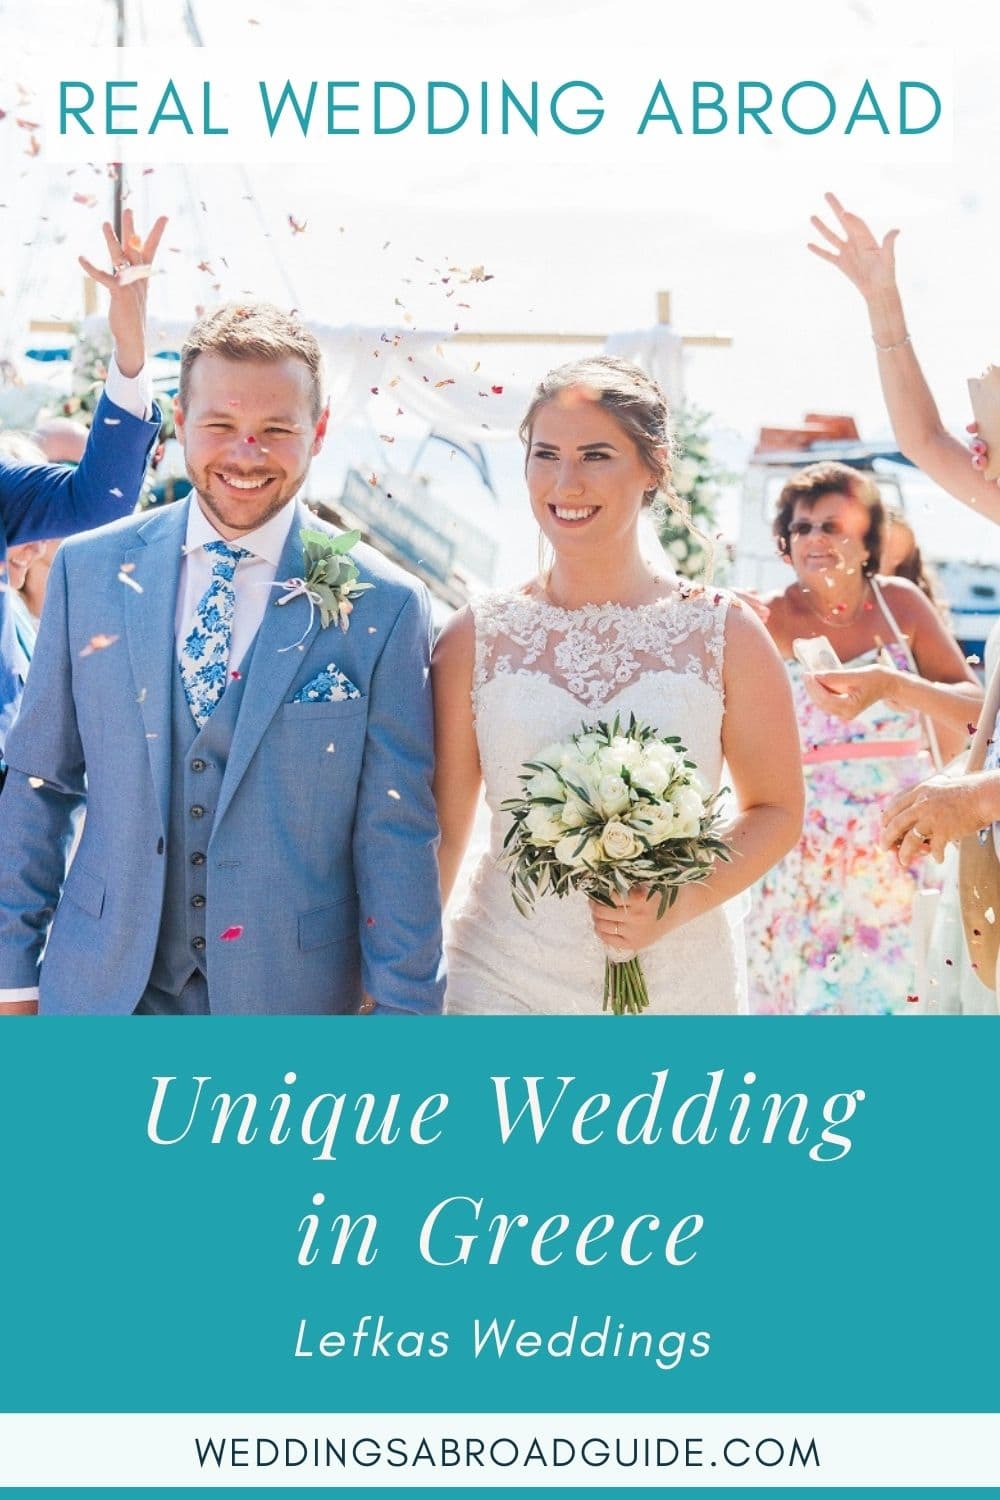 Intimate Real Wedding Abroad in Greece | Planned by Lefkas Weddings | Maxeen Kim Photography